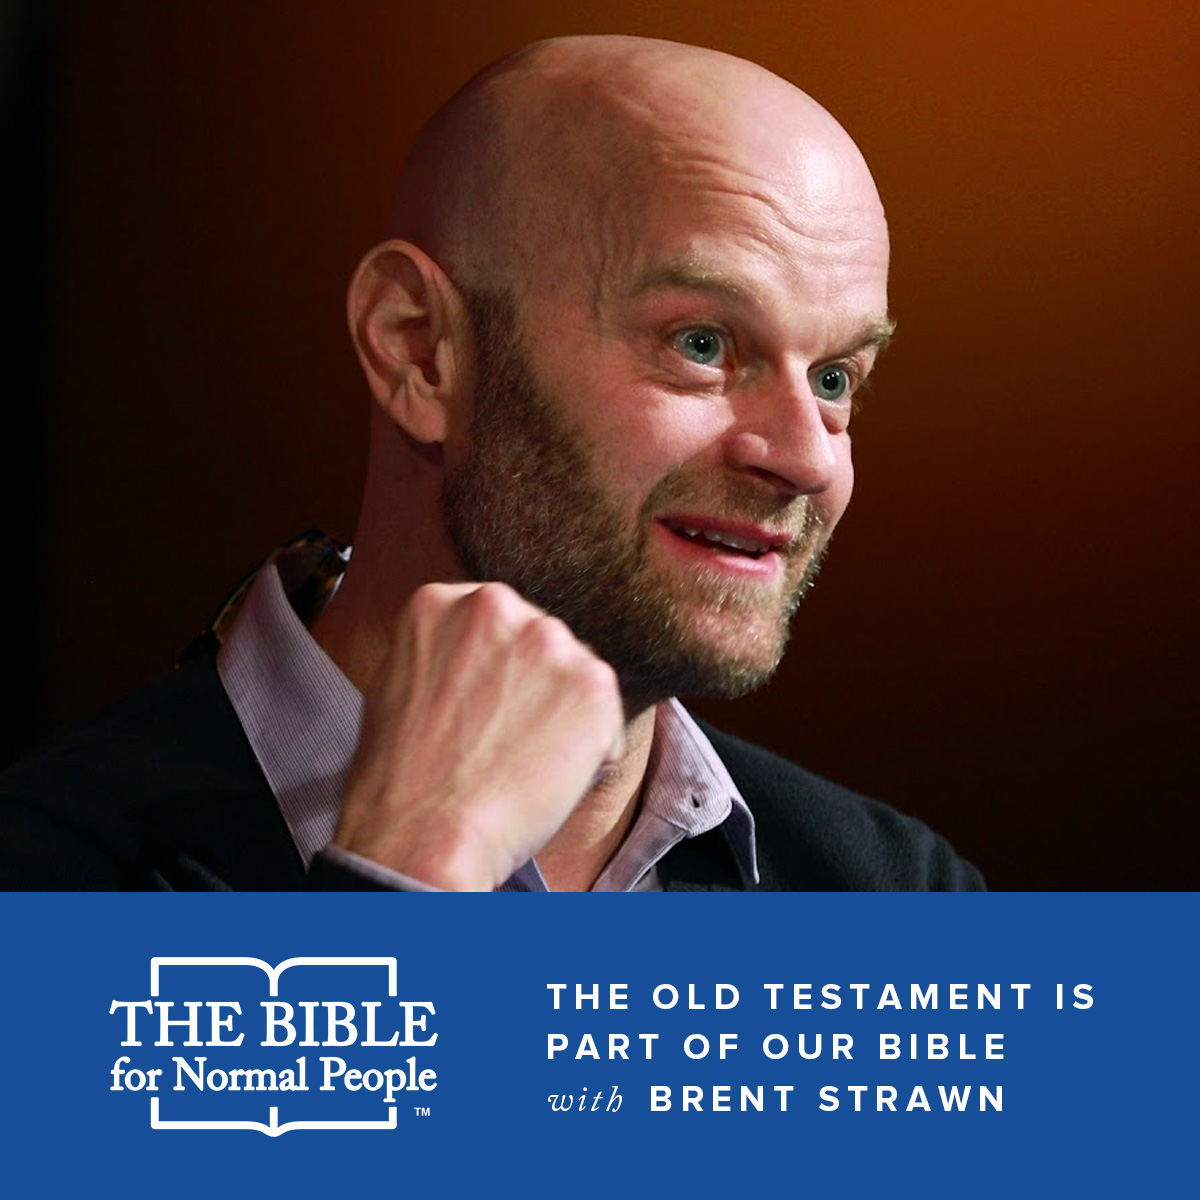 Interview with Brent Strawn: The Old Testament is Part of Our Bible and You Can’t Avoid It